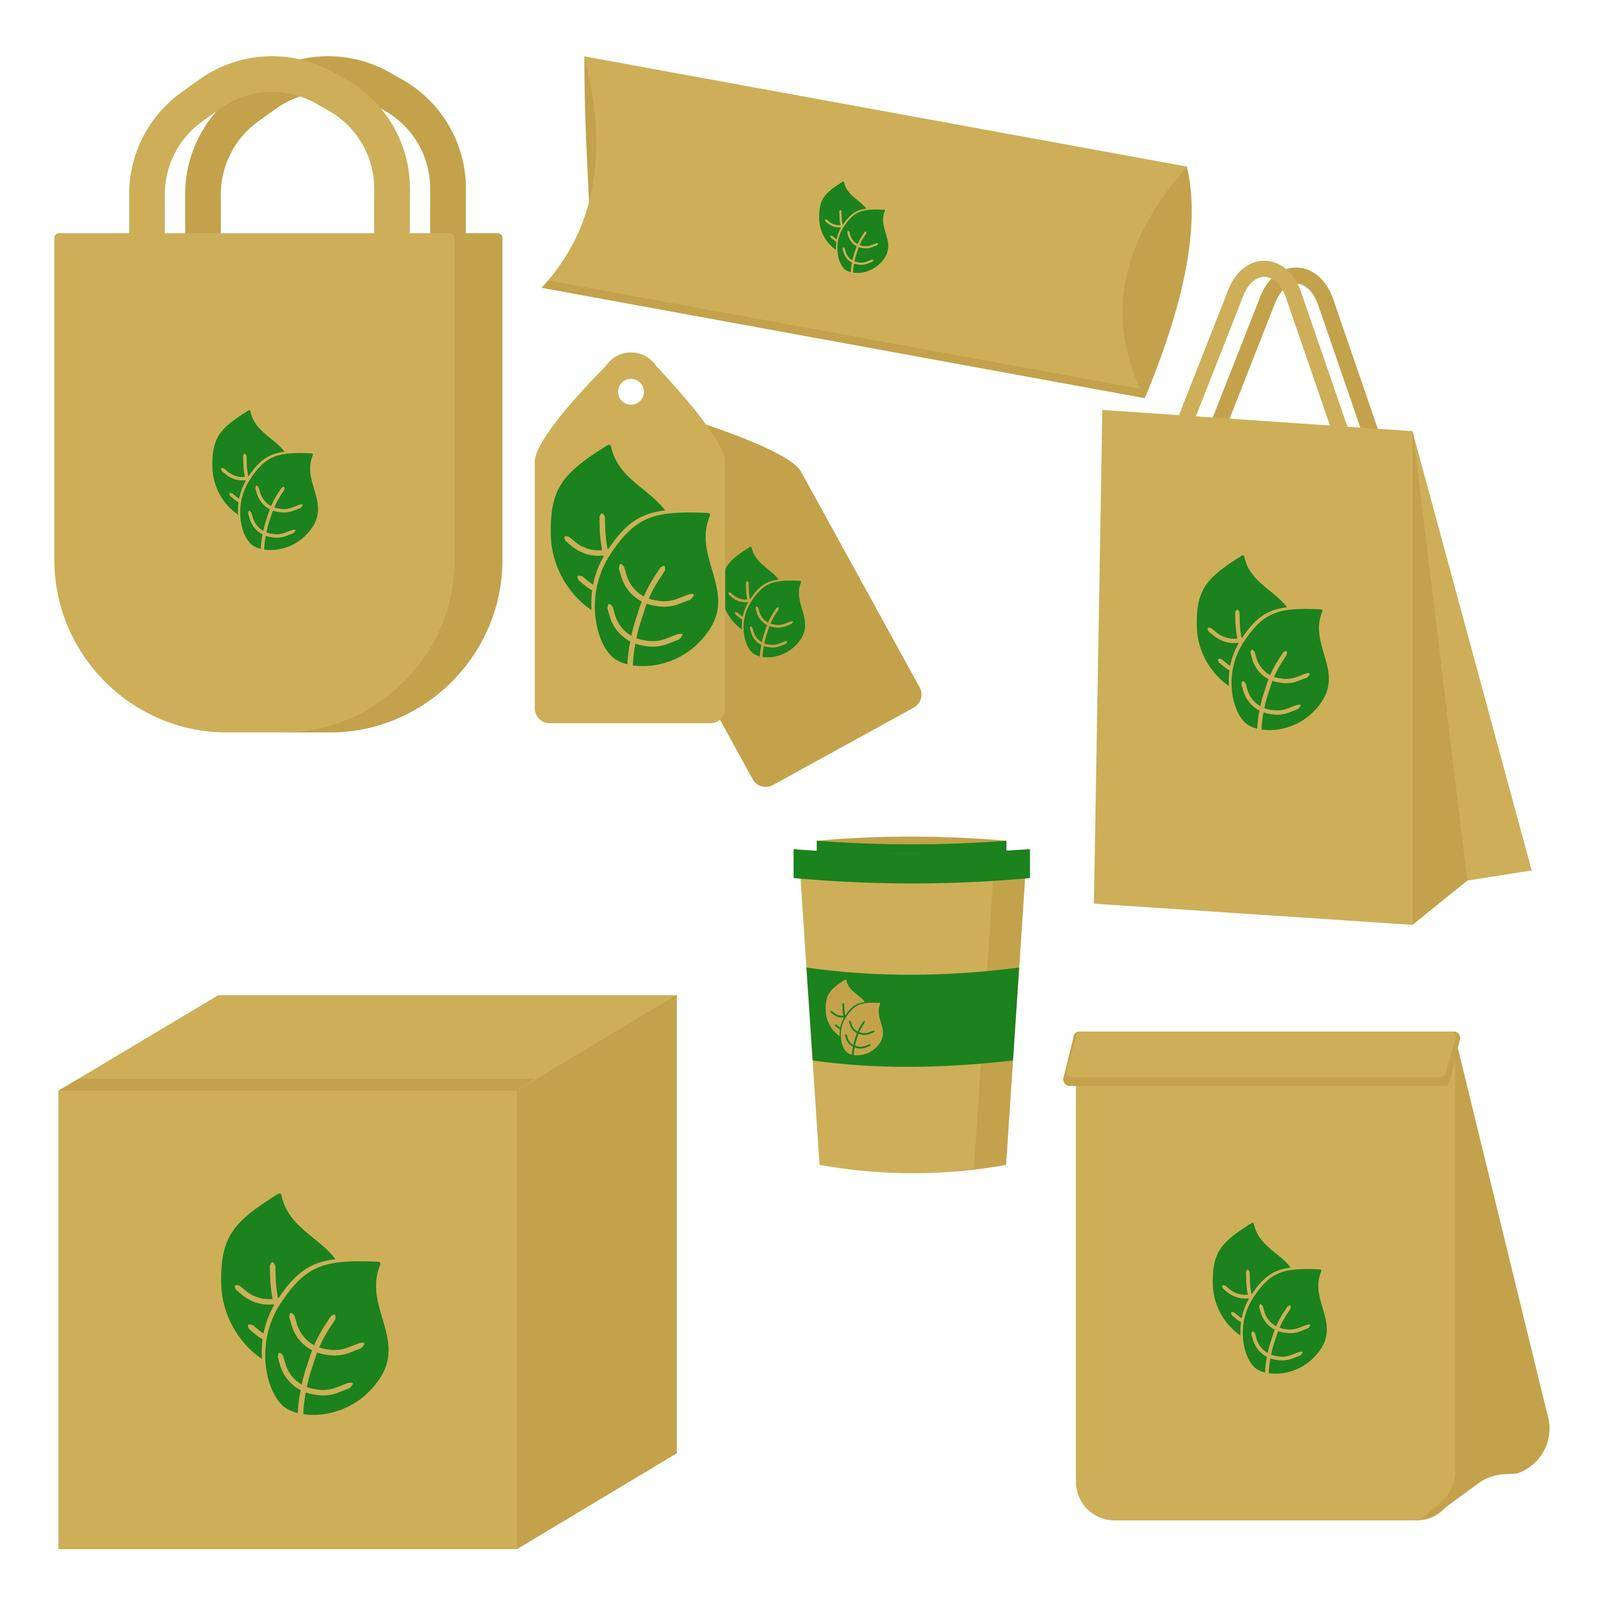 Eco friendly packaging set for various goods, packaging for things and items, shopping bags, brown paper bag, food container and beverage cup in flat style with green leaf symbol vector illustration